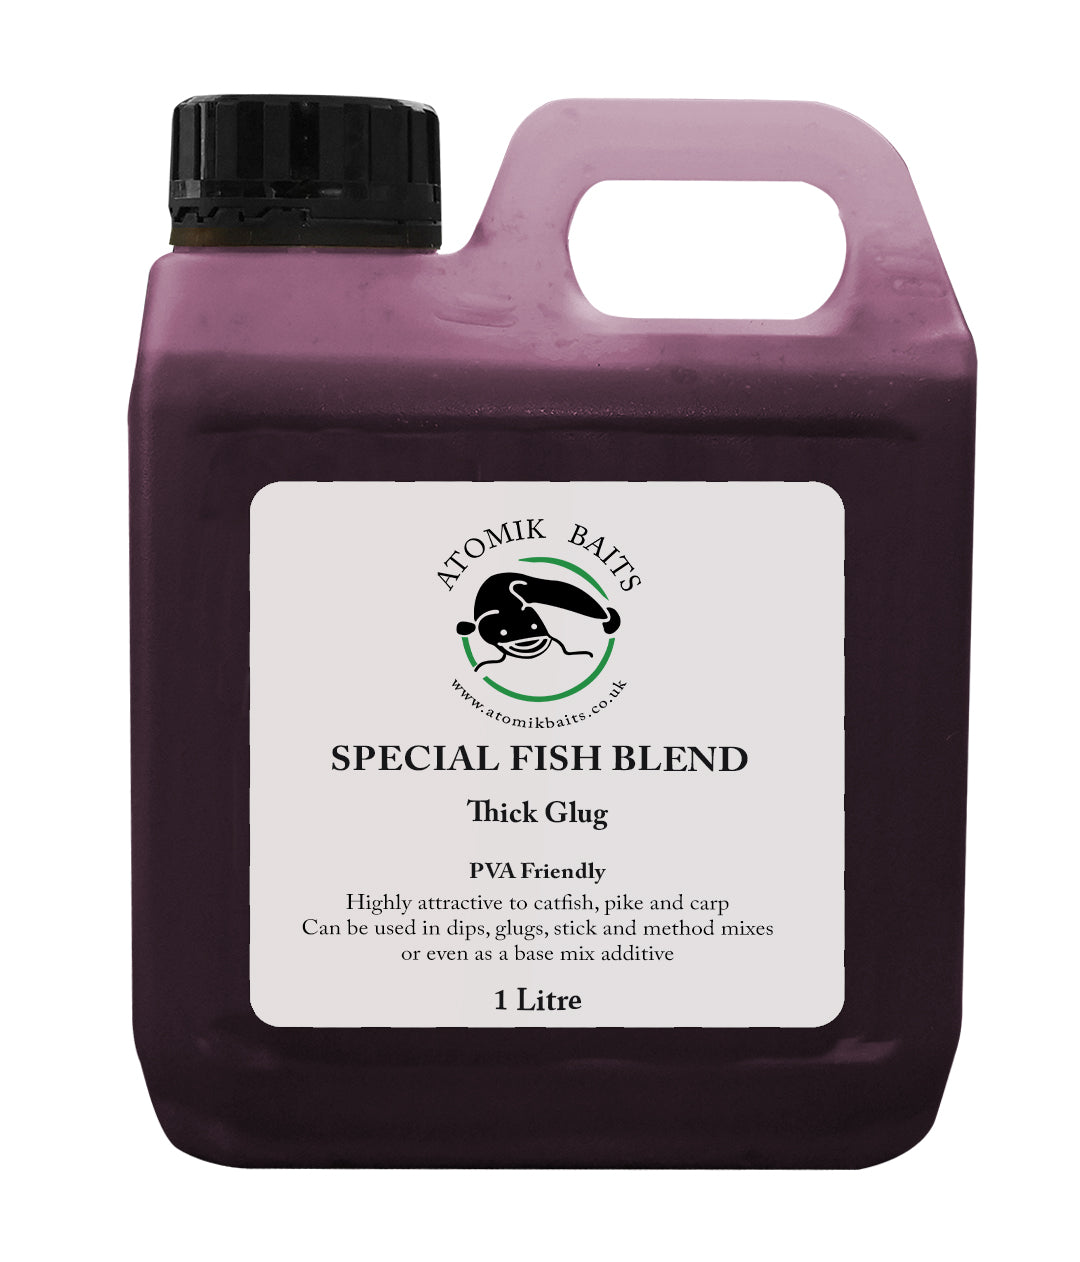 Special Fish Blend - Glug, Particle Feed, Liquid Additive, Dip -1 Litre 1000ml